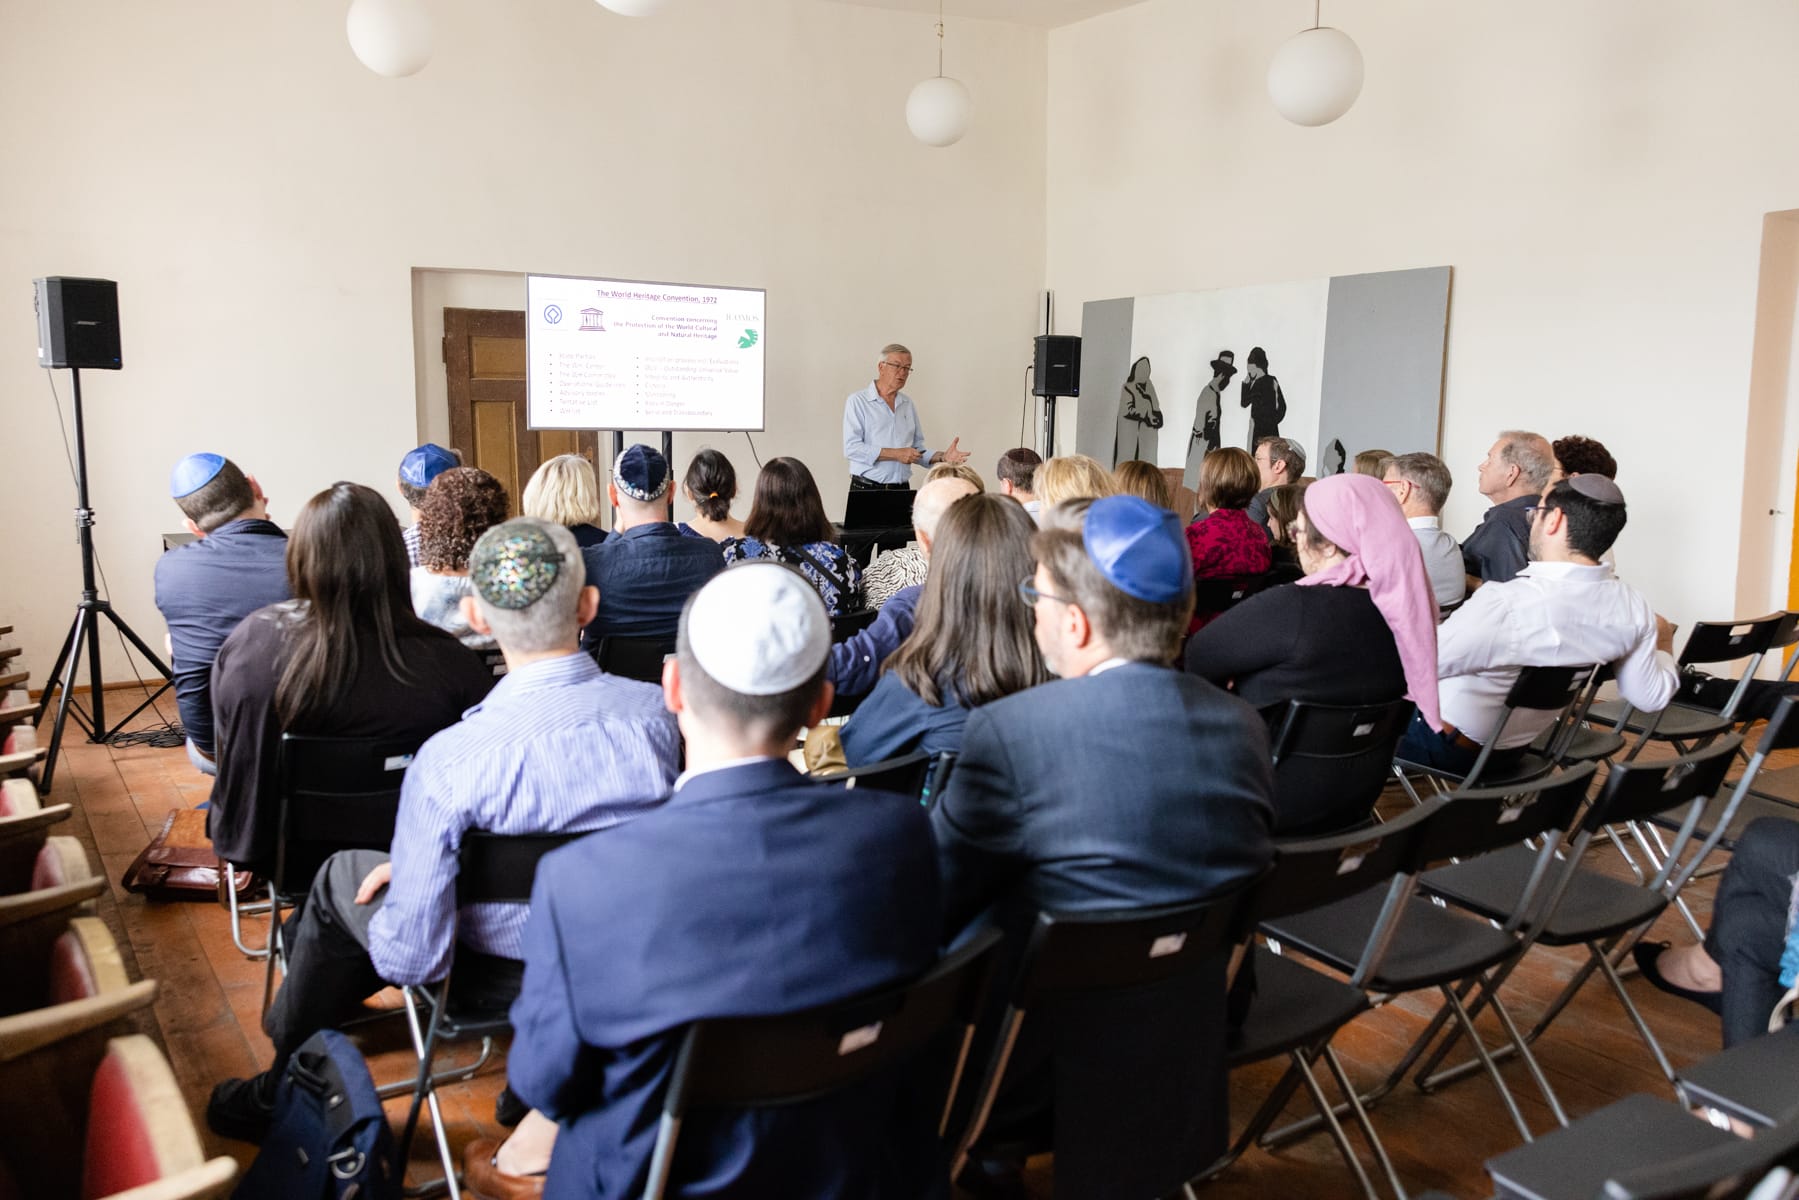 Architect Giora Solar gave a lecture to guests inside the Mikvah.